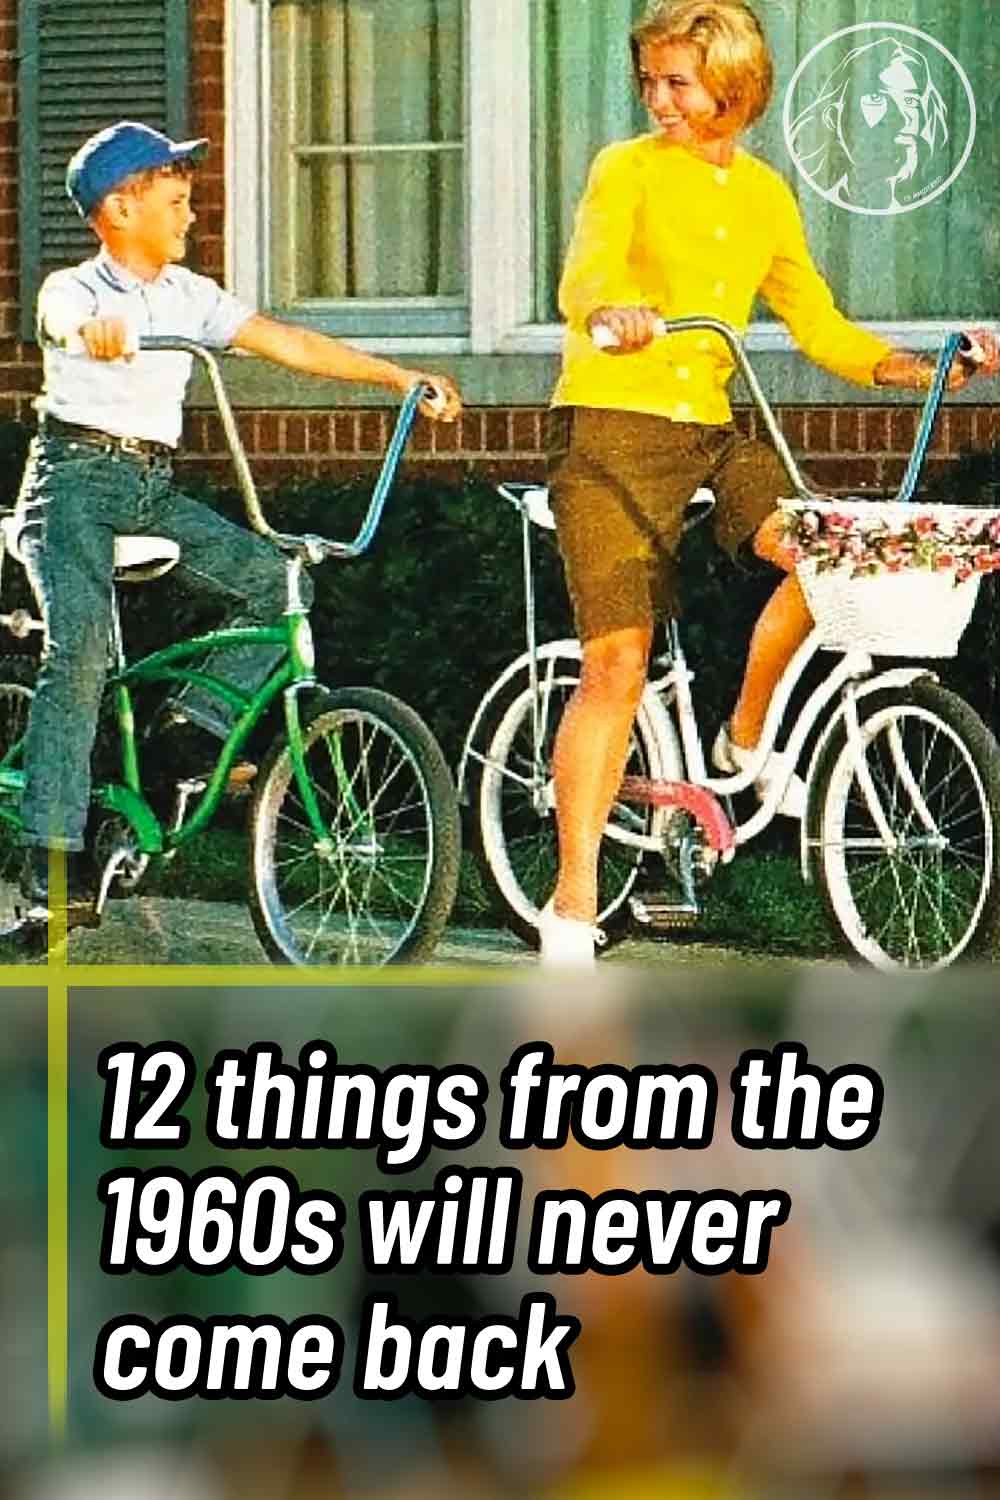 12 things from the 1960s will never come back